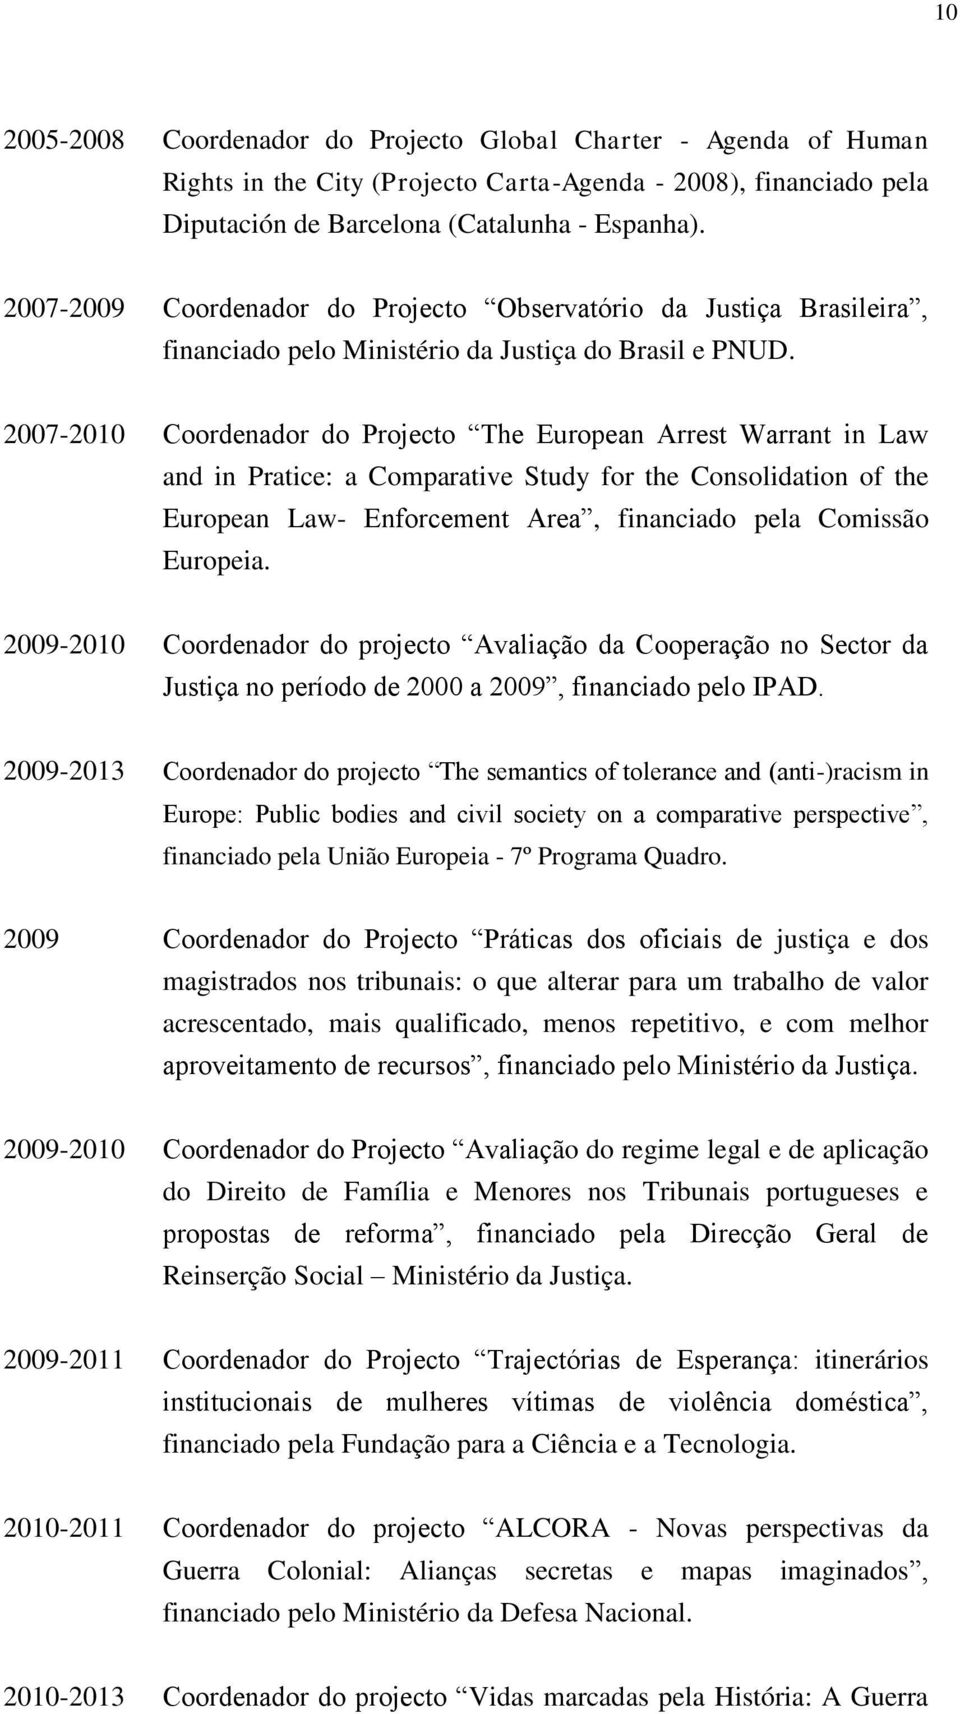 2007-2010 Coordenador do Projecto The European Arrest Warrant in Law and in Pratice: a Comparative Study for the Consolidation of the European Law- Enforcement Area, financiado pela Comissão Europeia.